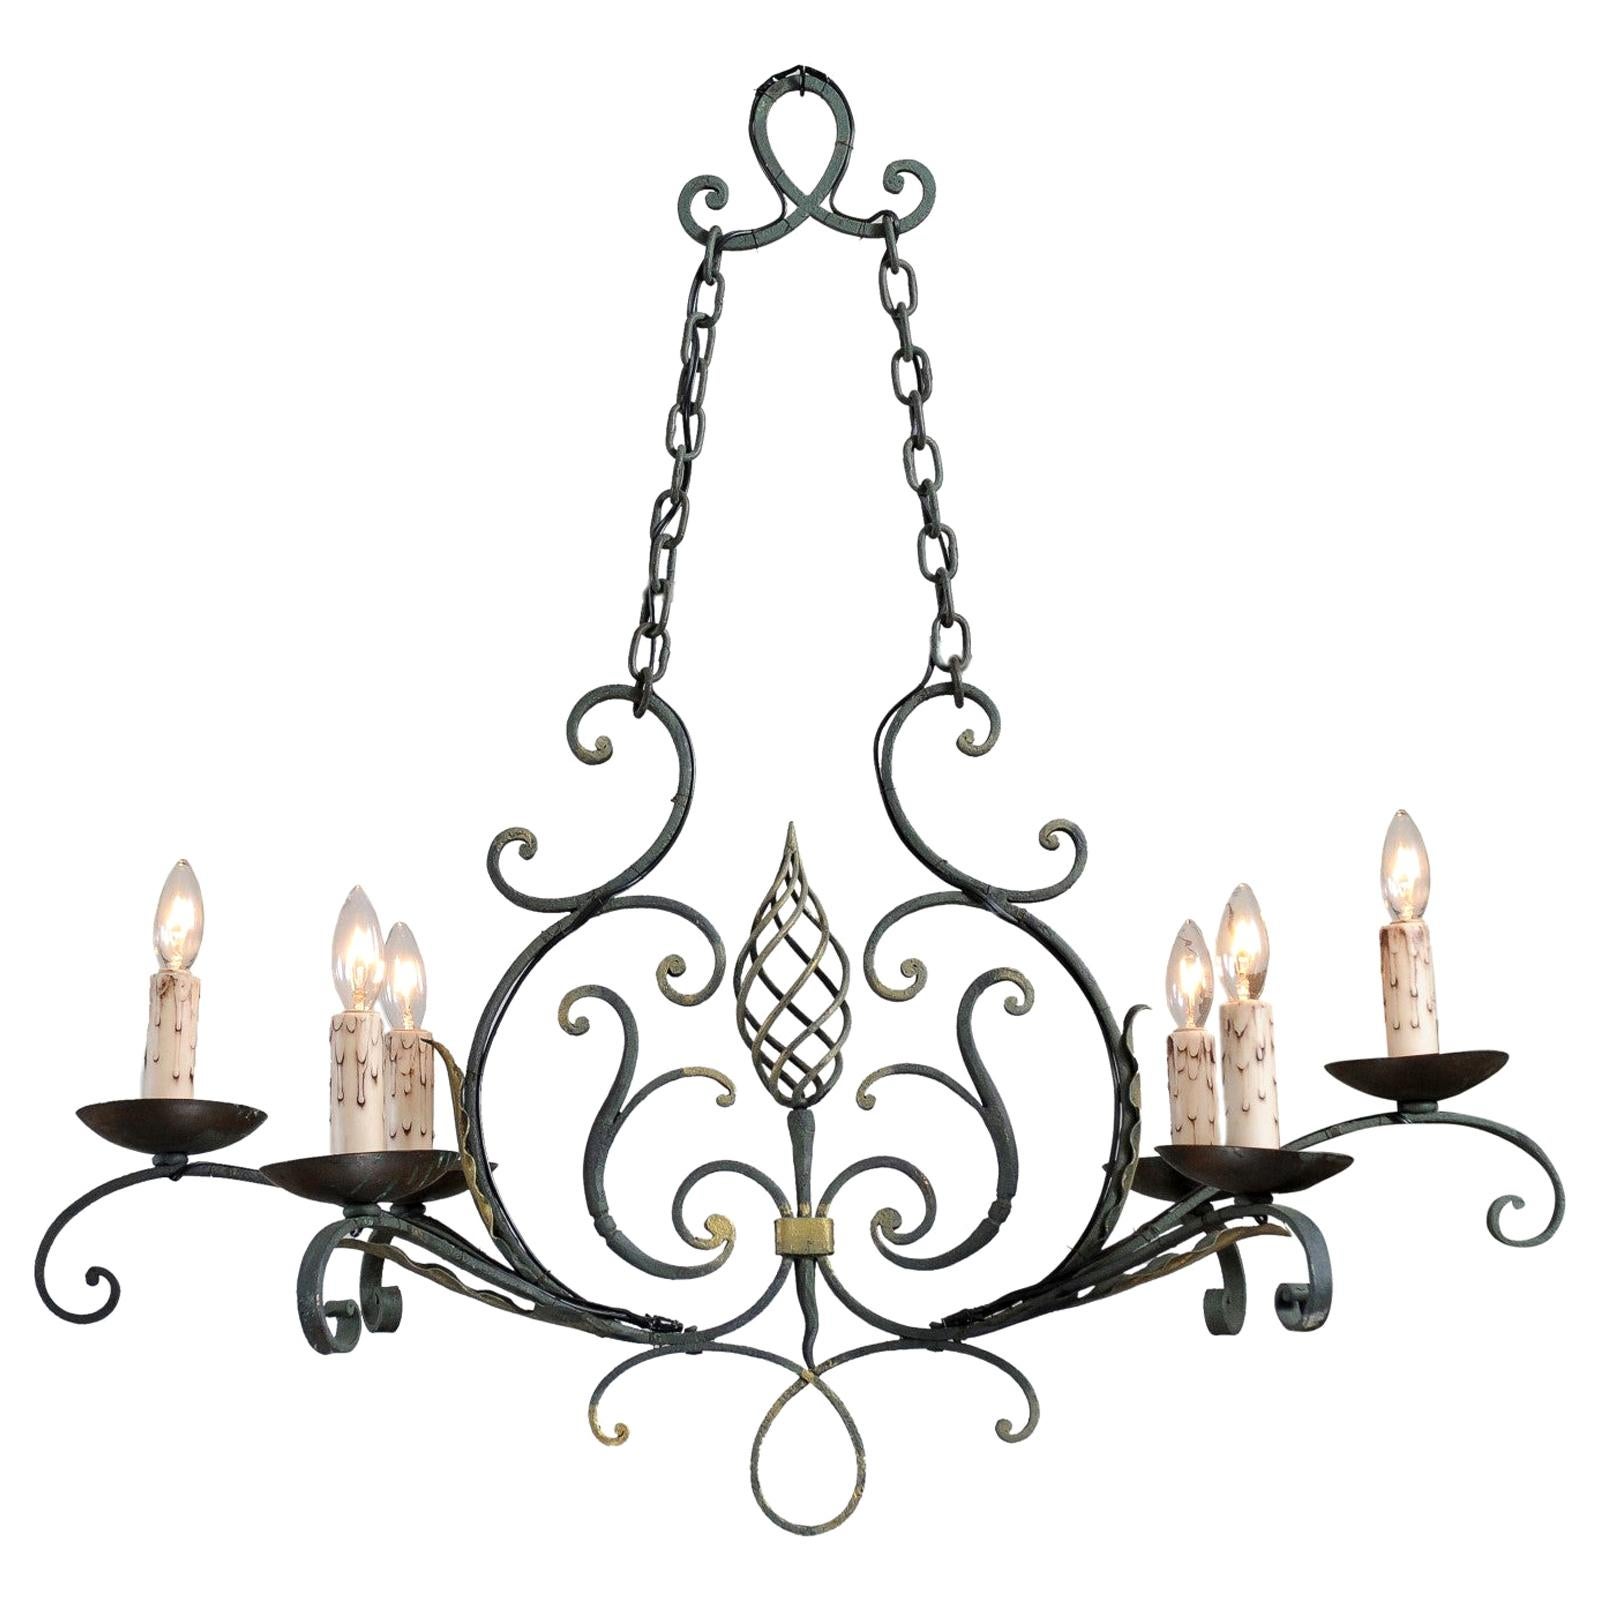 French 19th Century Six-Light Iron Chandelier with Spiral and Scrolling Arms For Sale